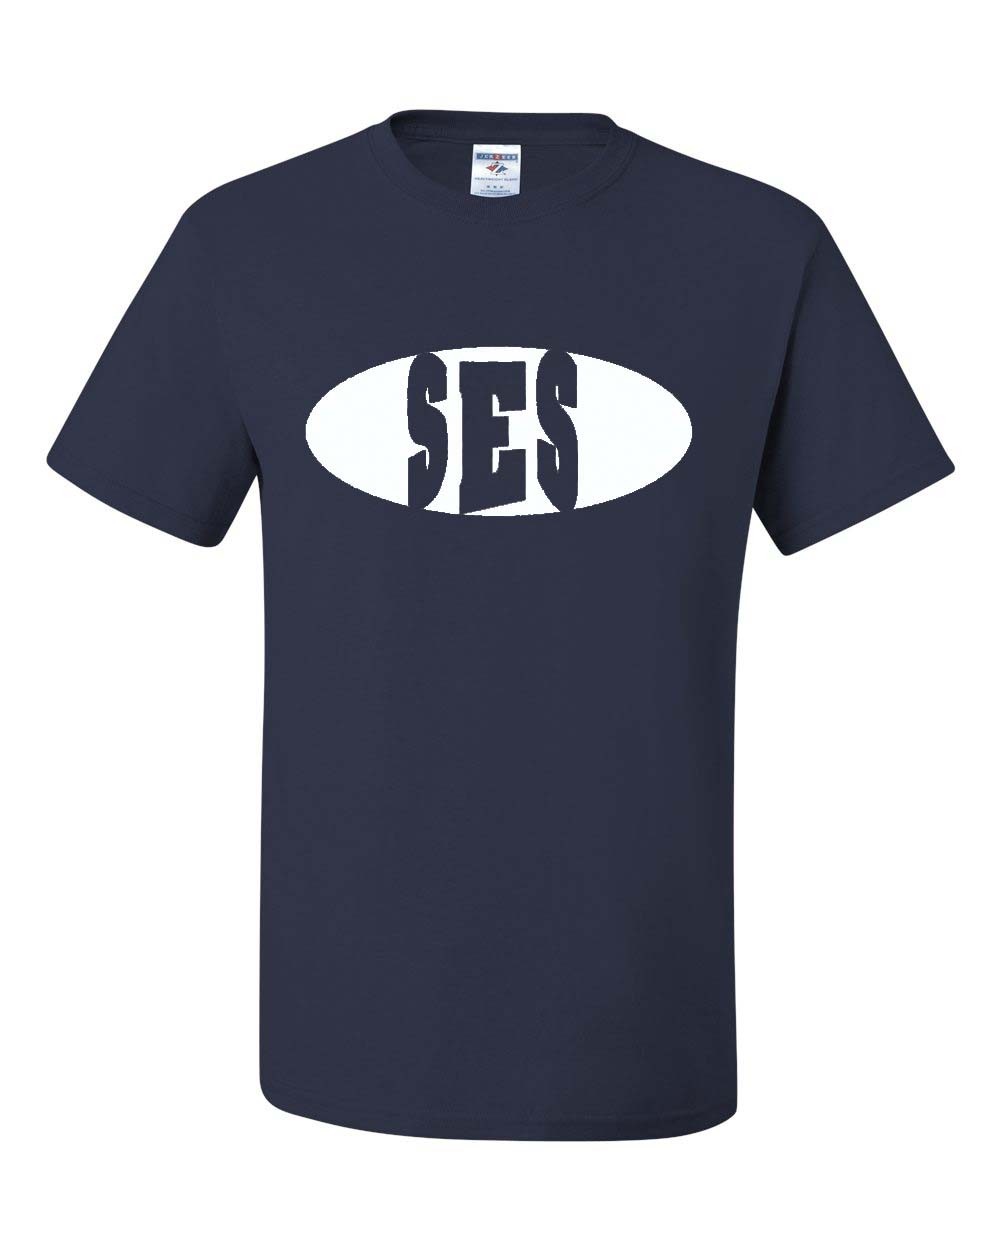 SES Full Front S/S Spirit T-Shirt w/ White Logo - Please Allow 2-3 Weeks for Delivery